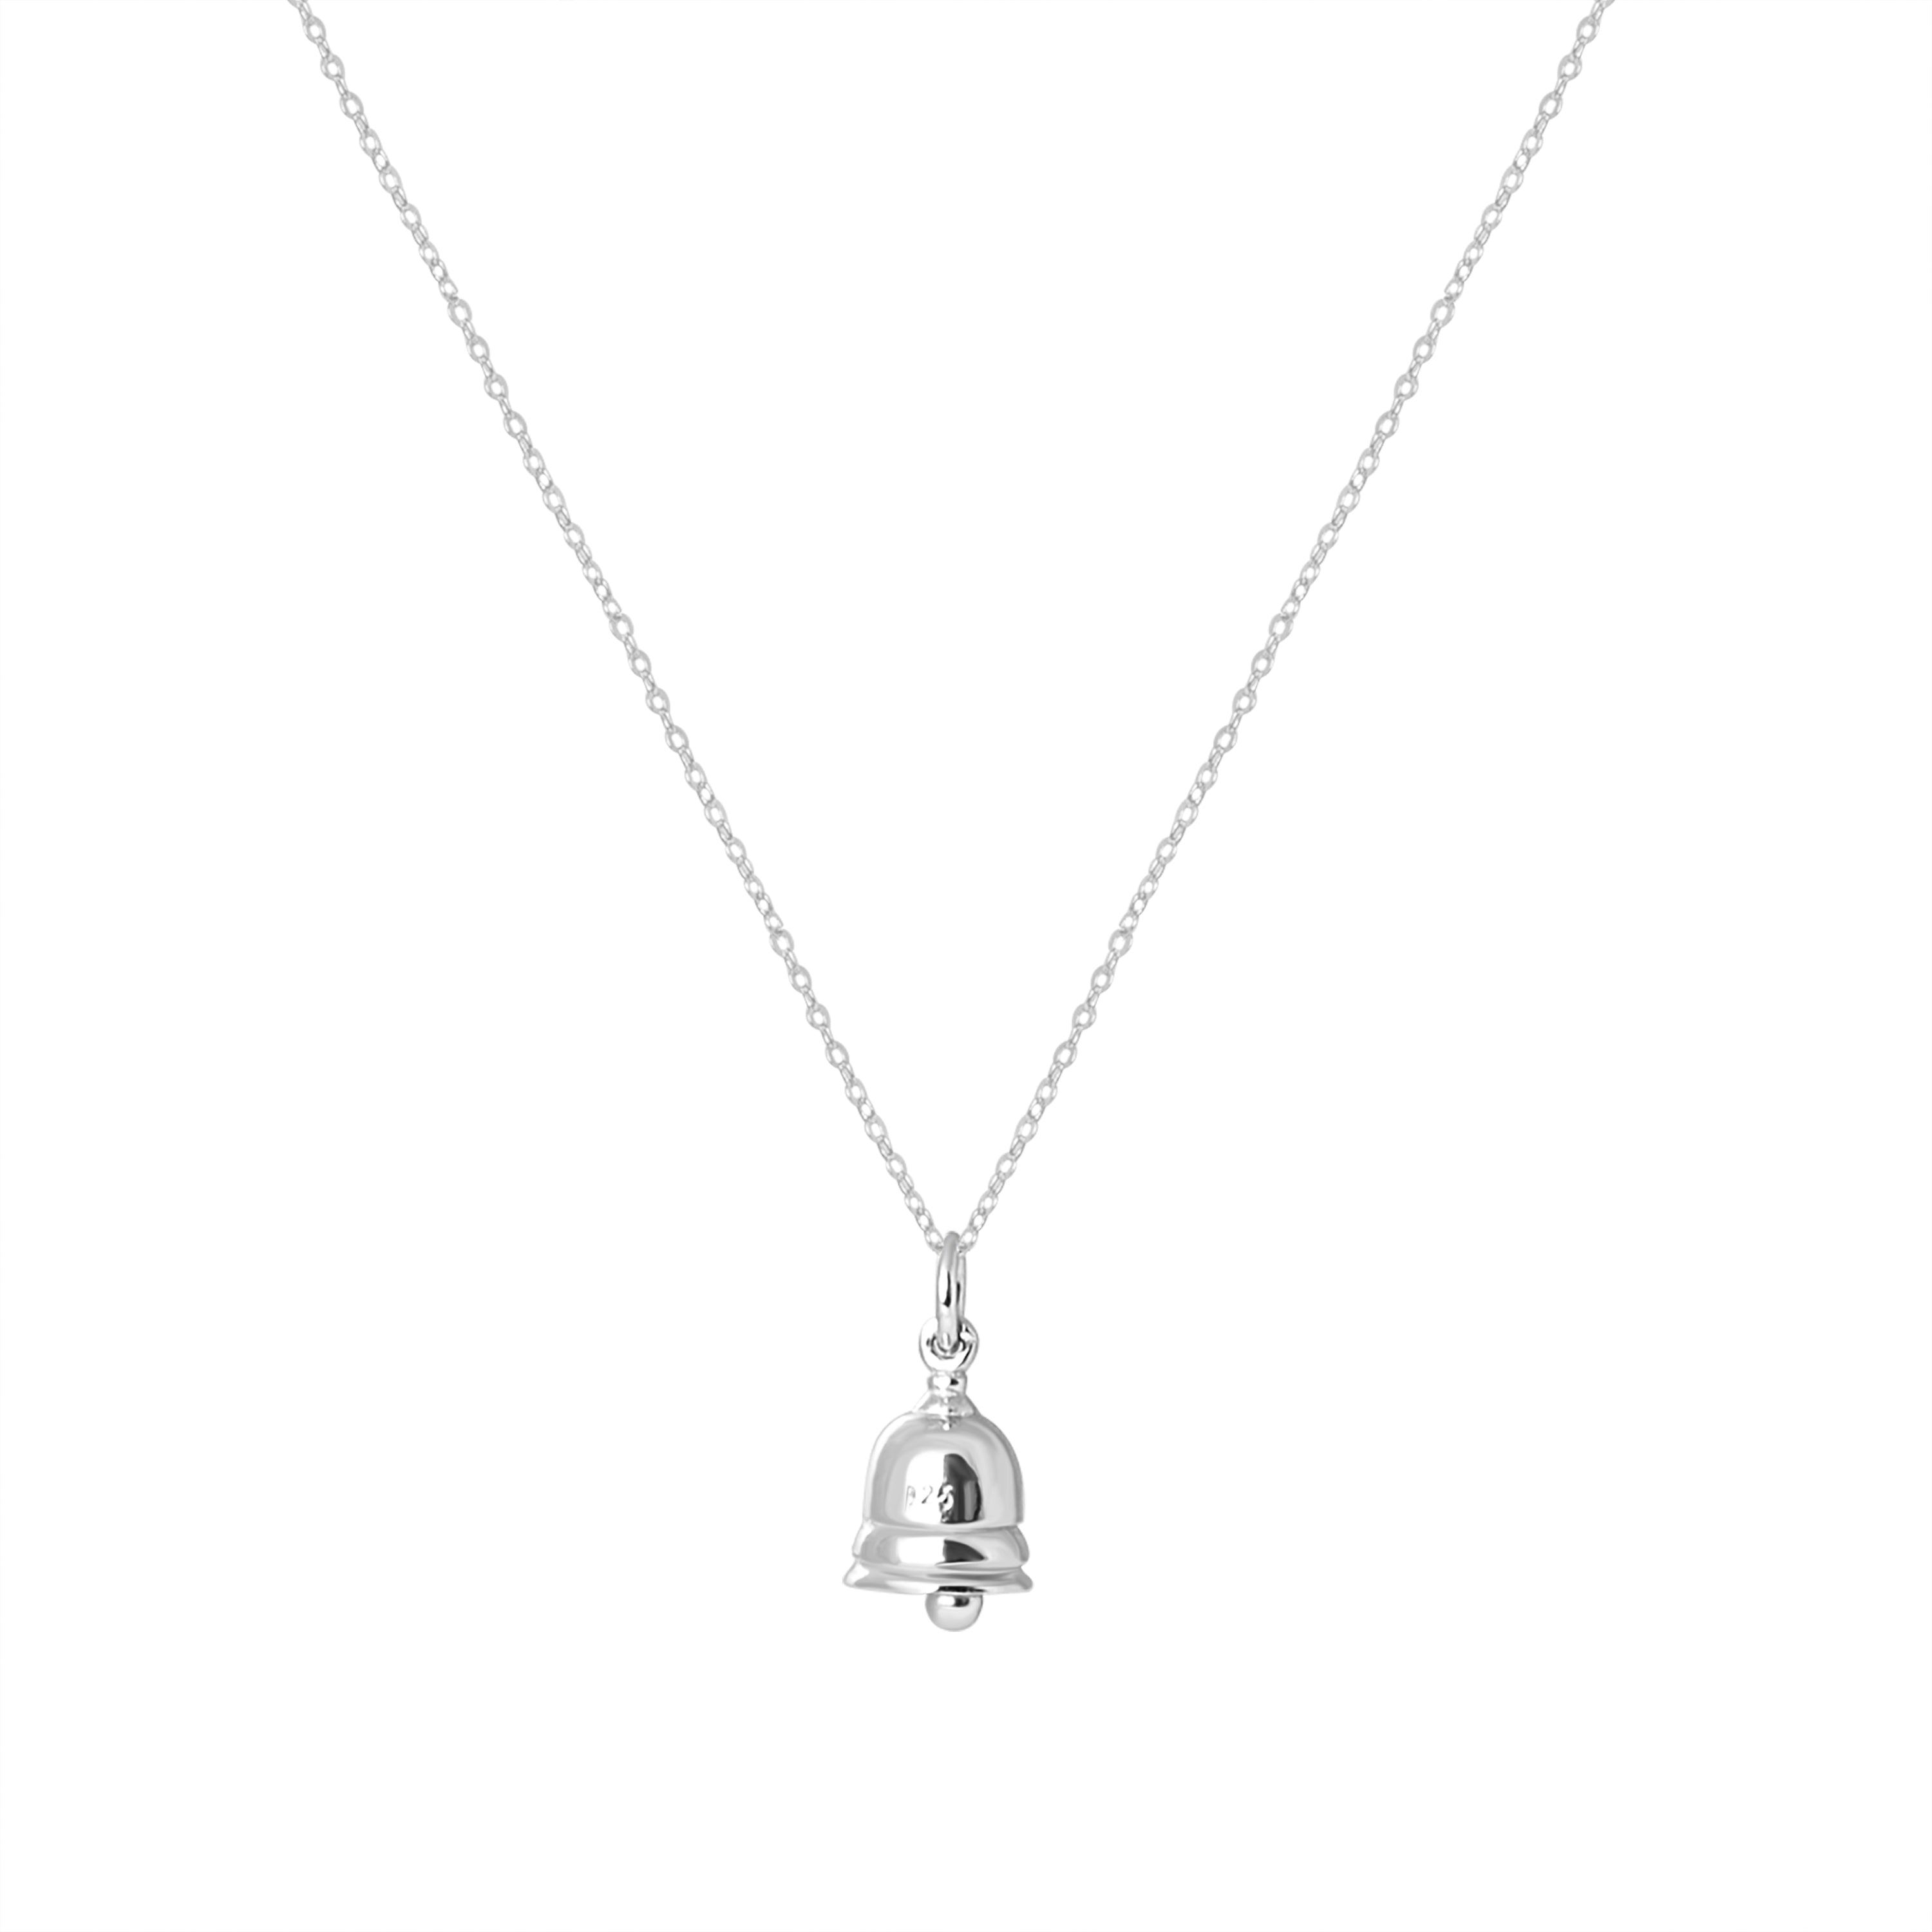 Yedia 925 Sterling Silver Necklace